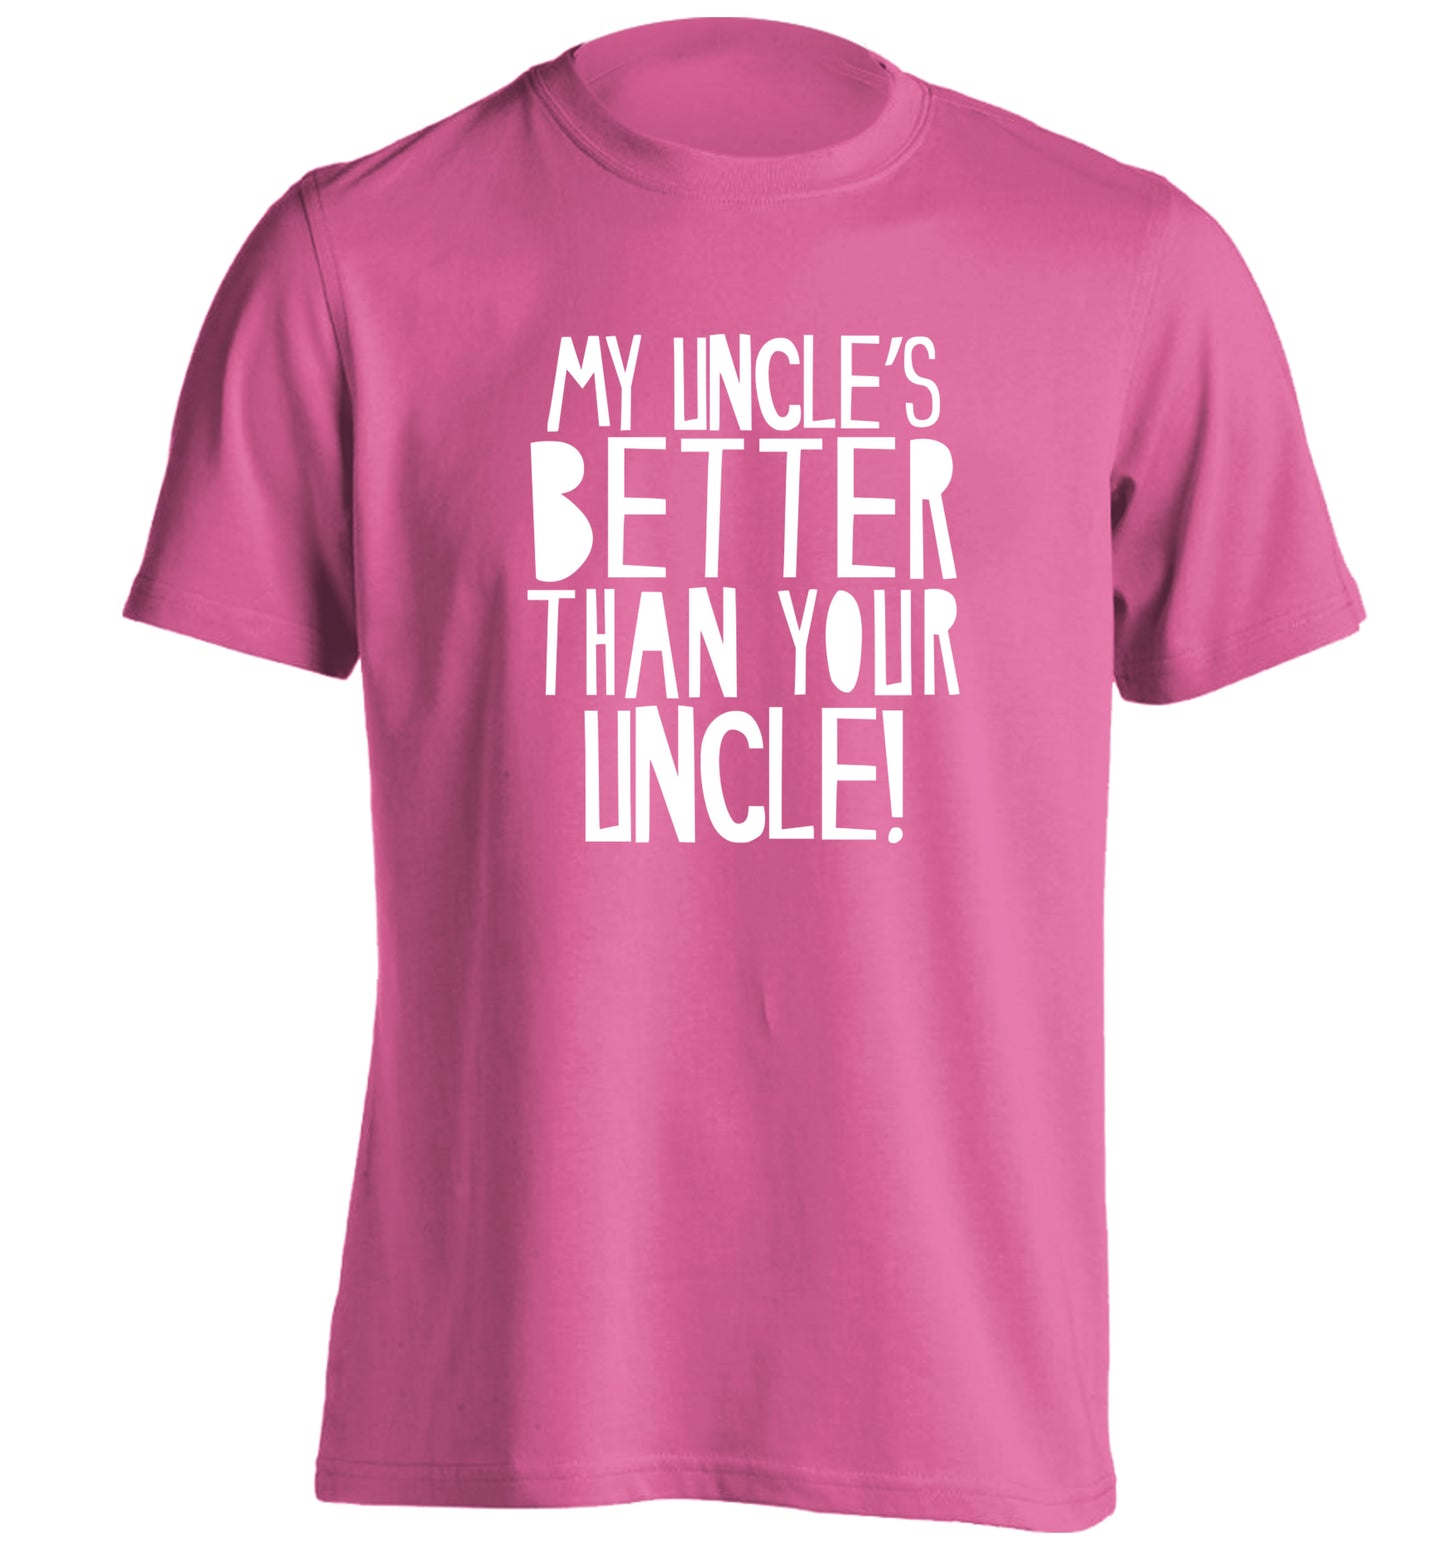 My uncles better than your uncle adults unisex pink Tshirt 2XL